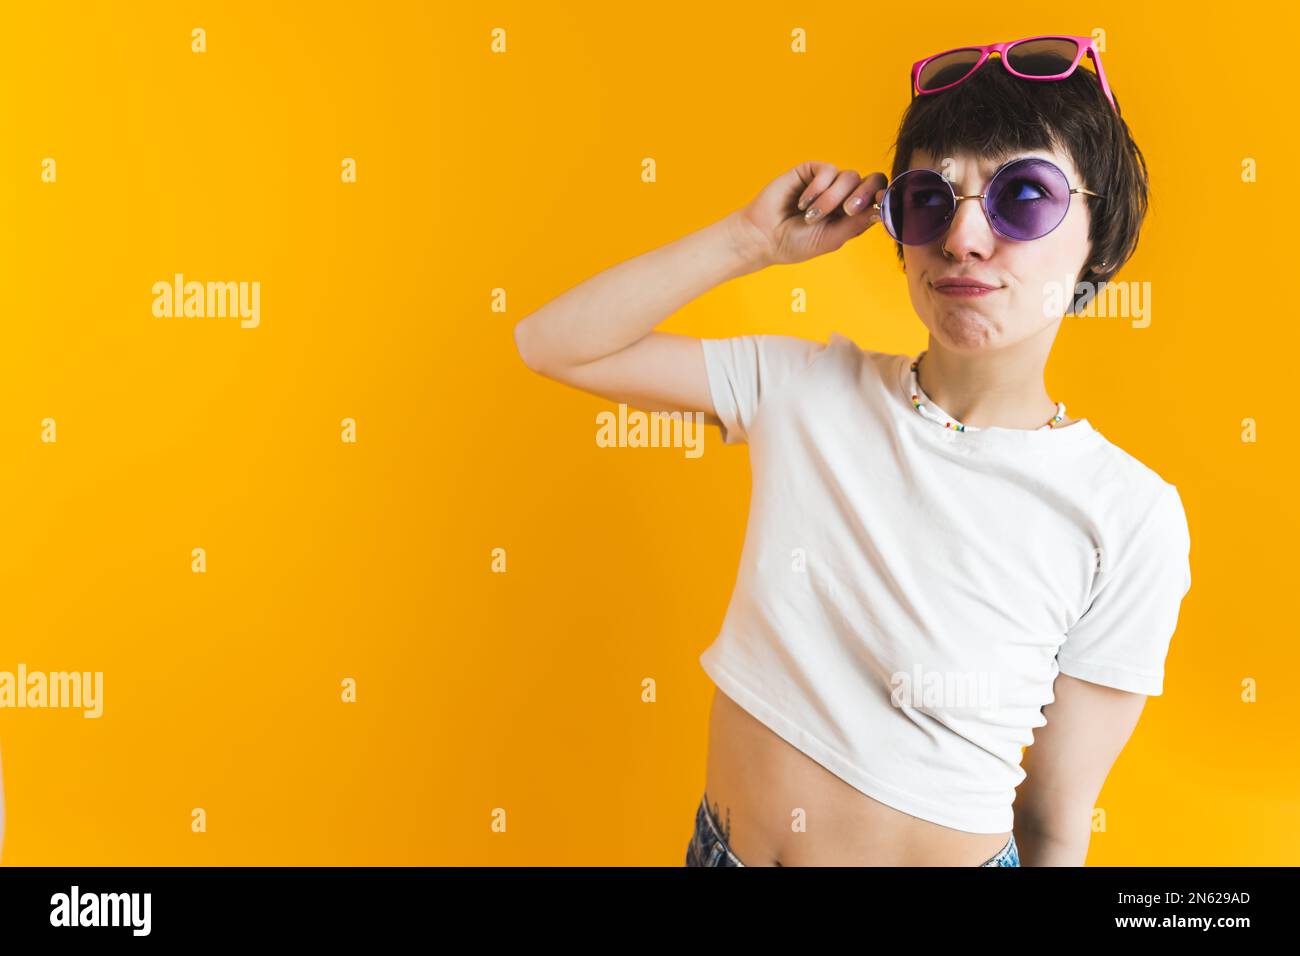 Positive young woman with multiple sunglasses on her head doing funny facial expressions and looking at copy space. Studio shot over orange background. High quality photo Stock Photo